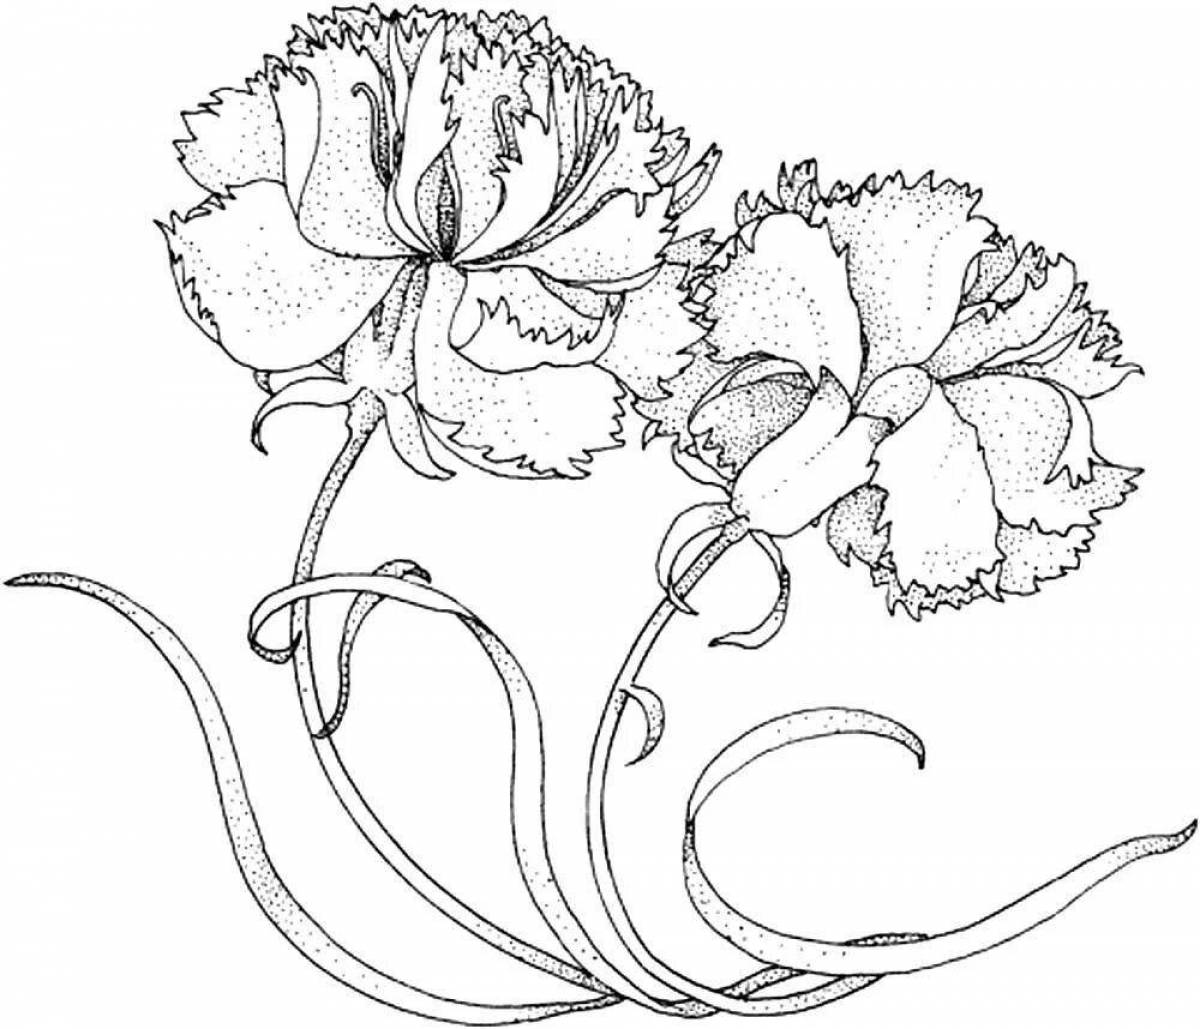 Fun carnation coloring book for kids